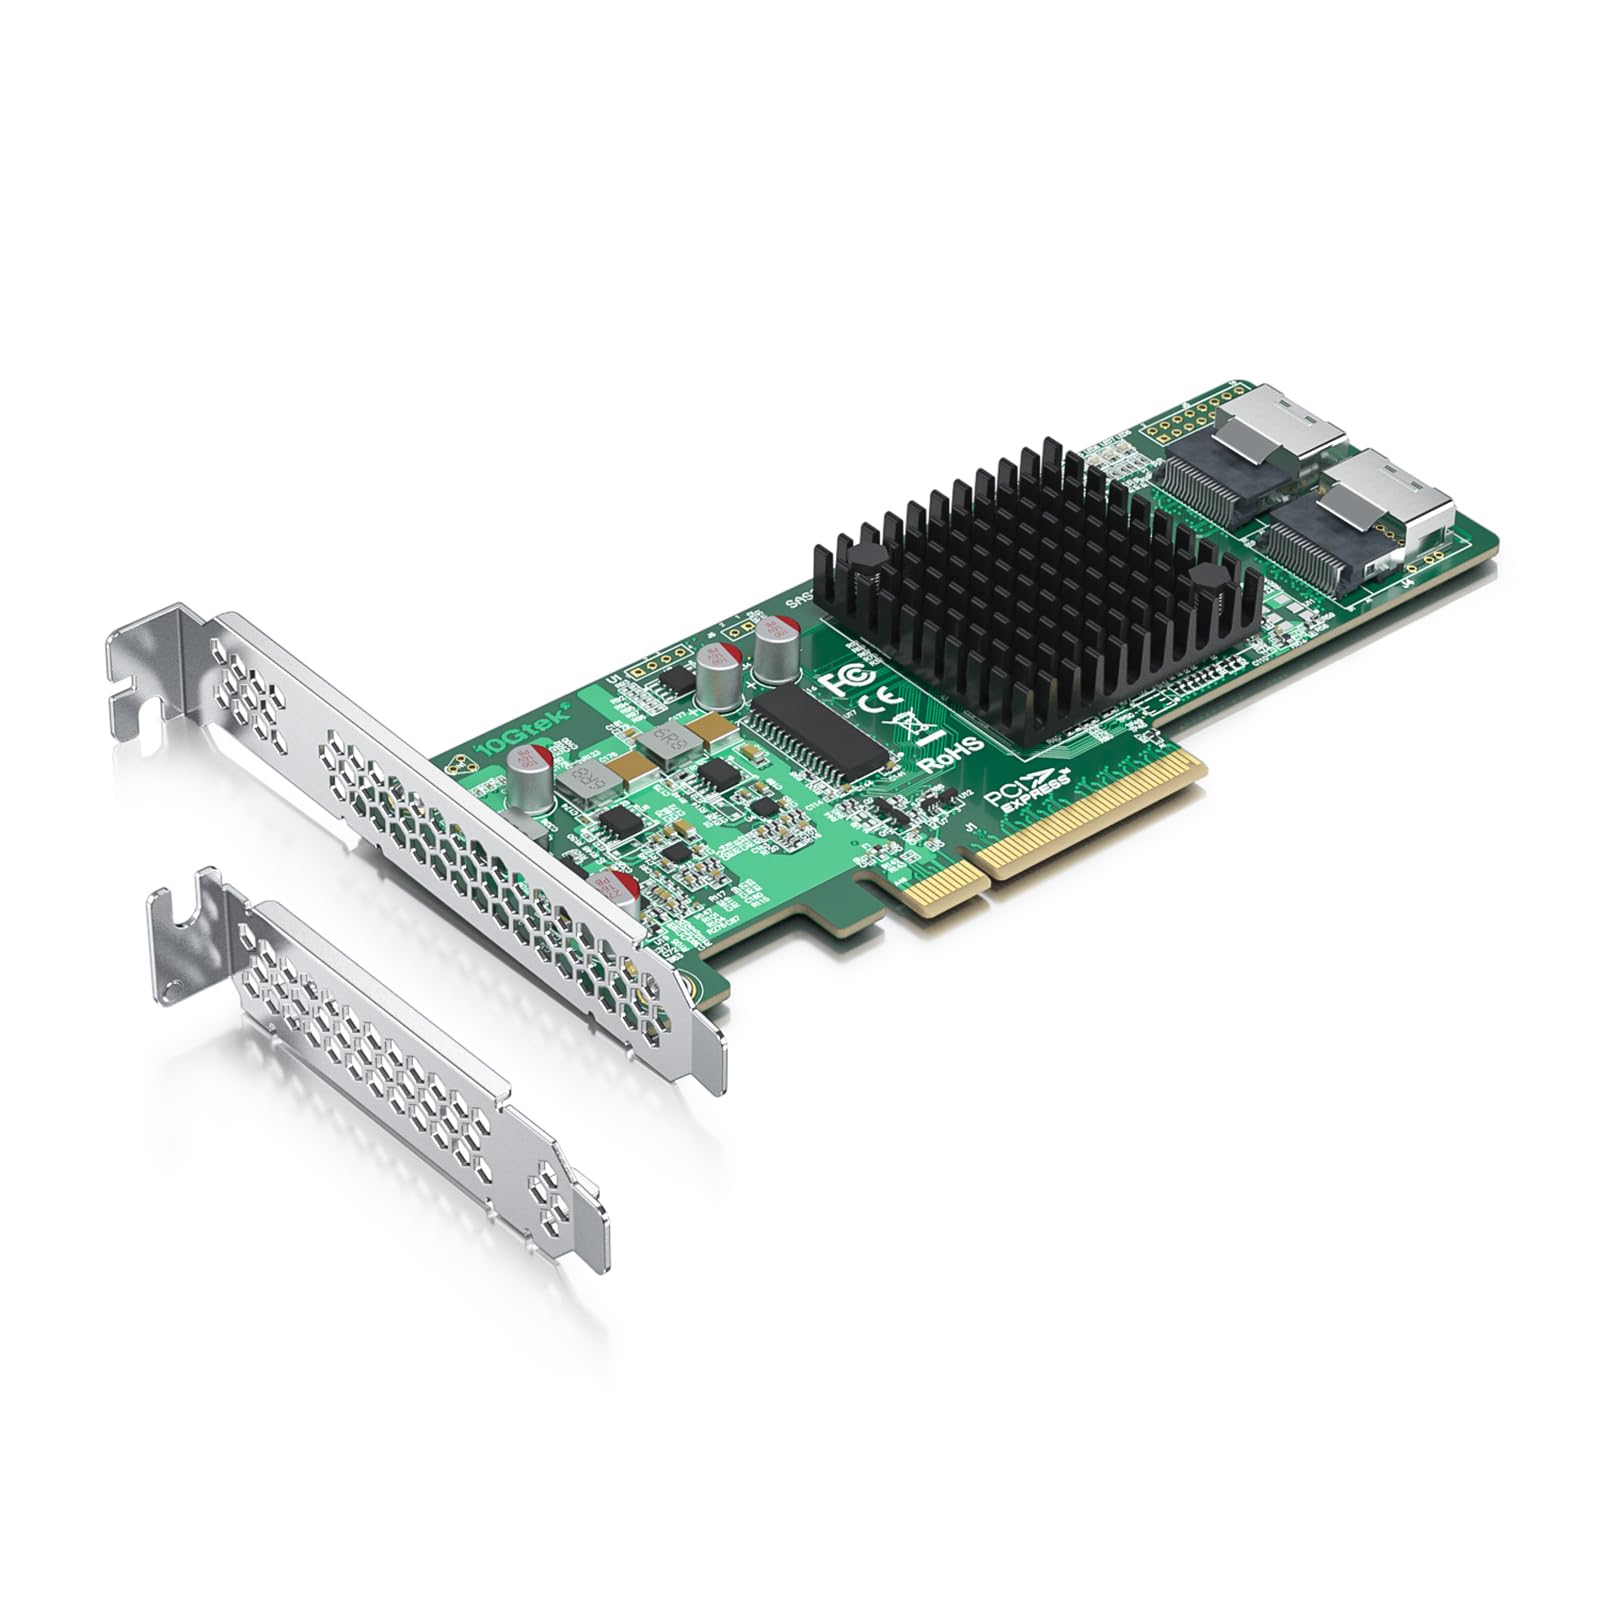 SAS 9200-8e PCI Express to 6Gb/s Serial Attached SCSI (SAS) Host Bus Adapter